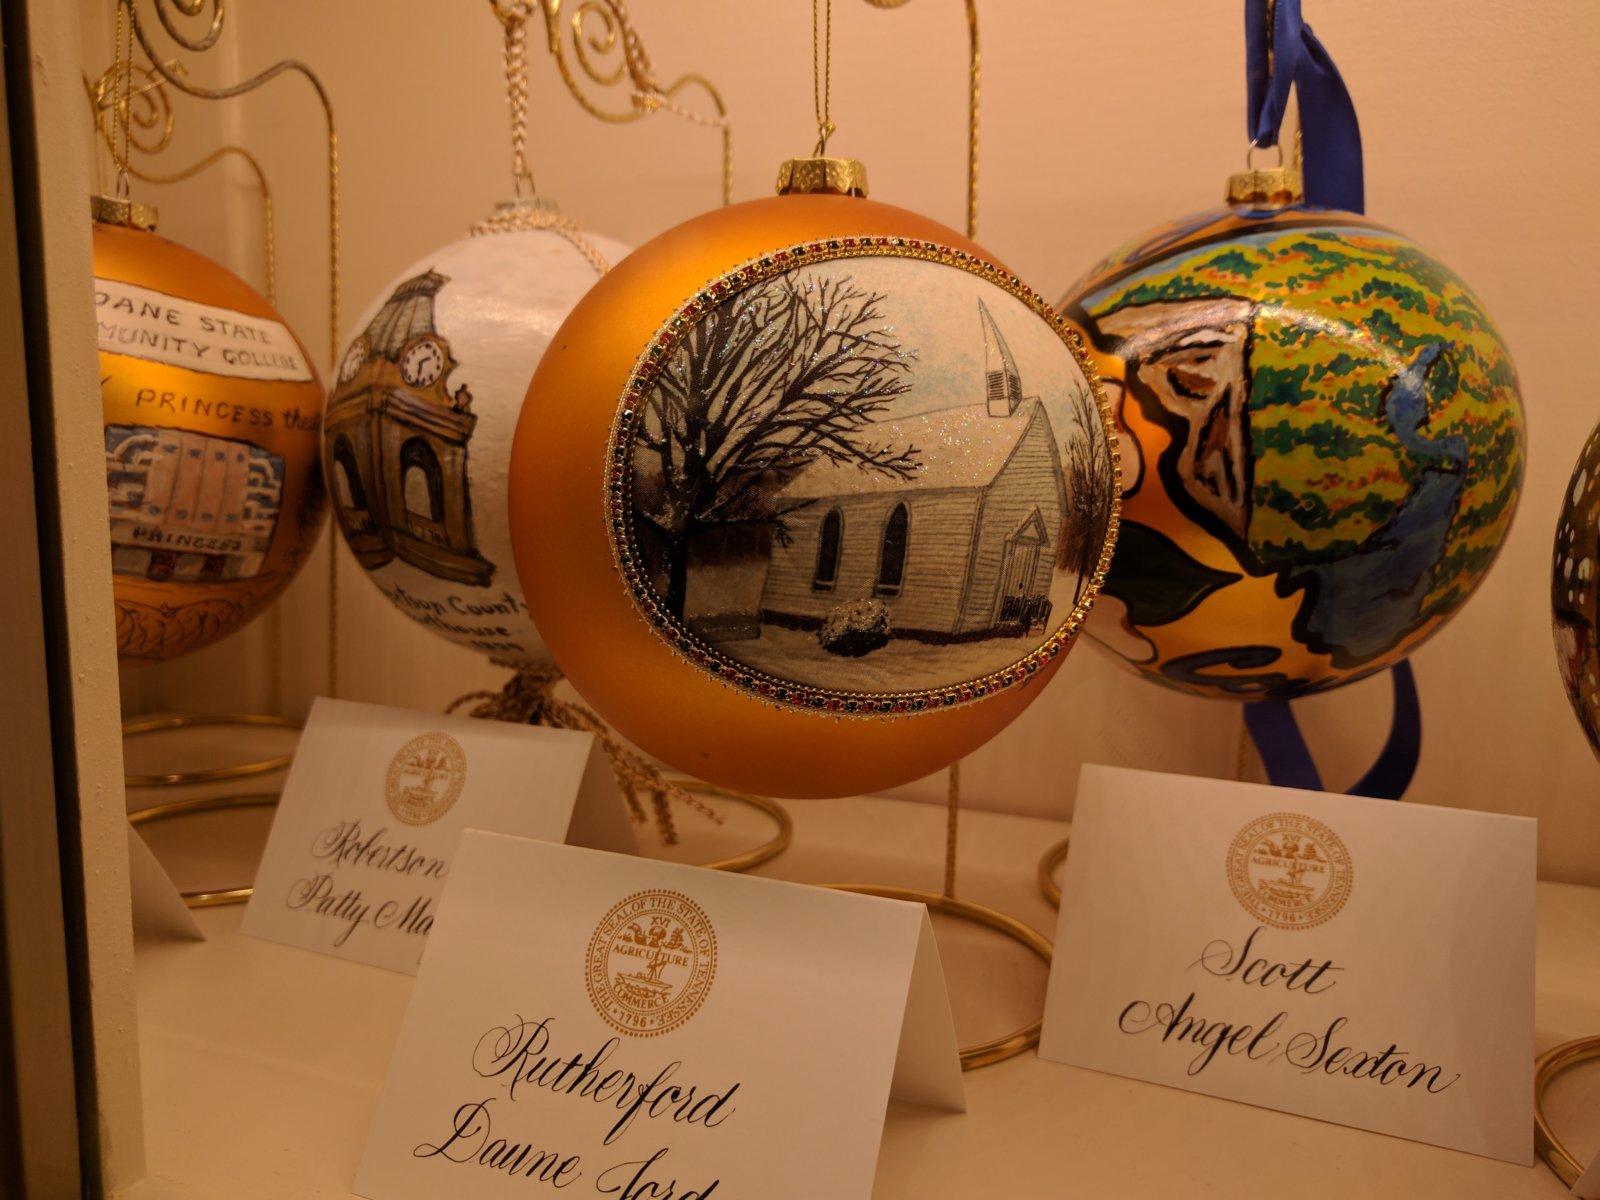 A hand painted ornament for each county.